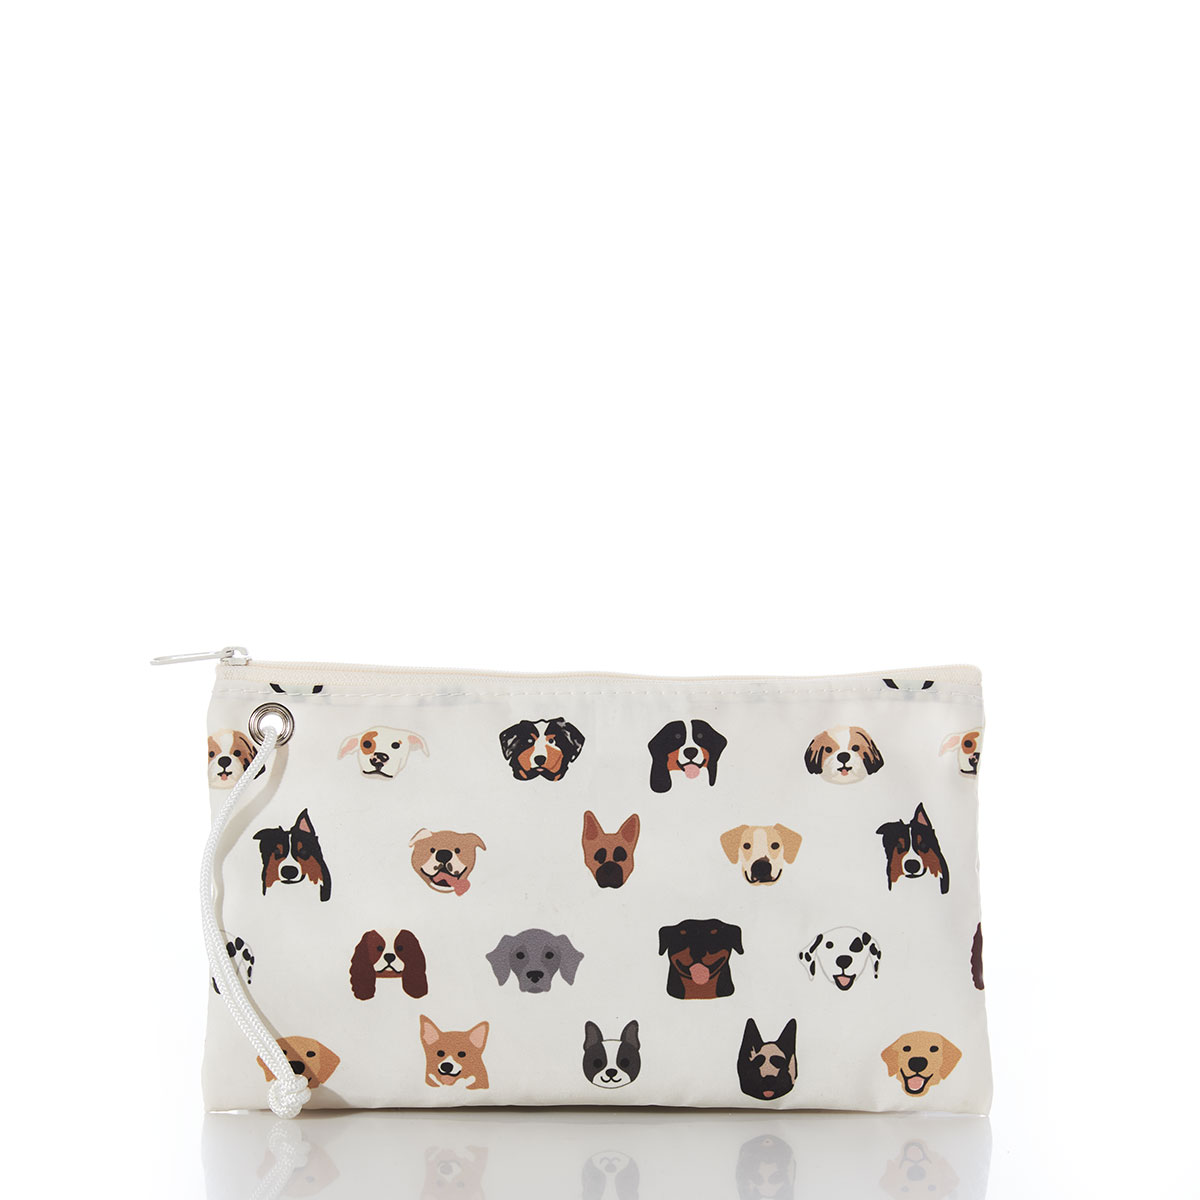 other side of pictures of a variety of popular puppies printed on white recycled sail cloth large wristlet with a white zipper and white cord handle.